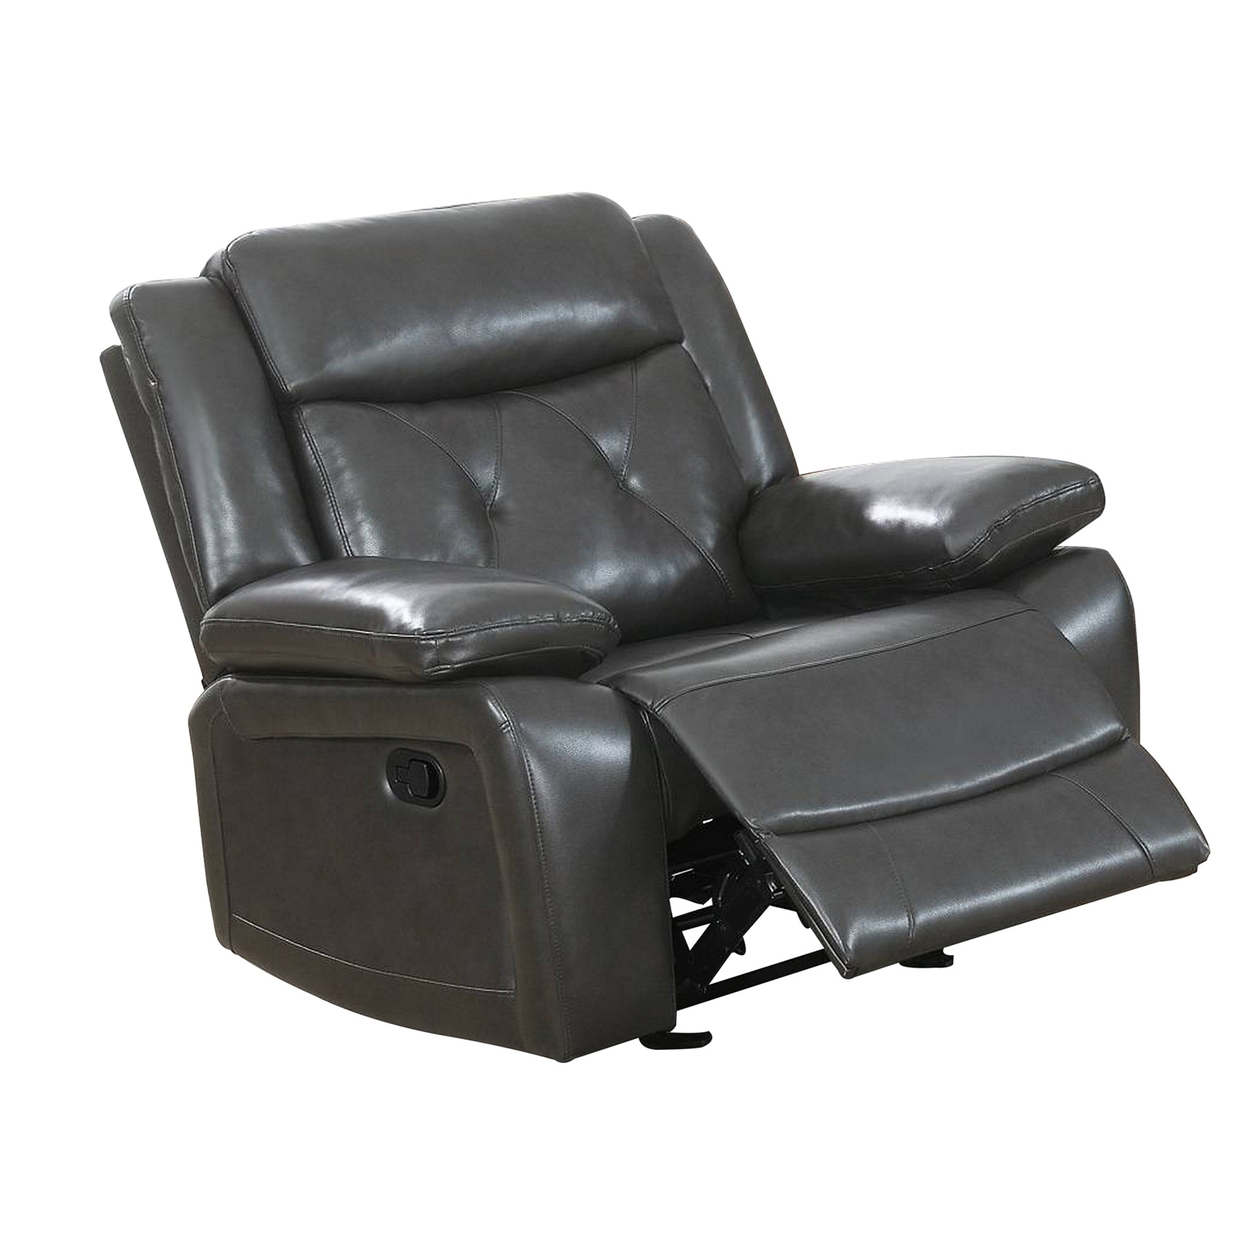 Nuna 40 Inch Power Recliner Chair With Manual Pull Tab, Taupe Faux Leather- Saltoro Sherpi